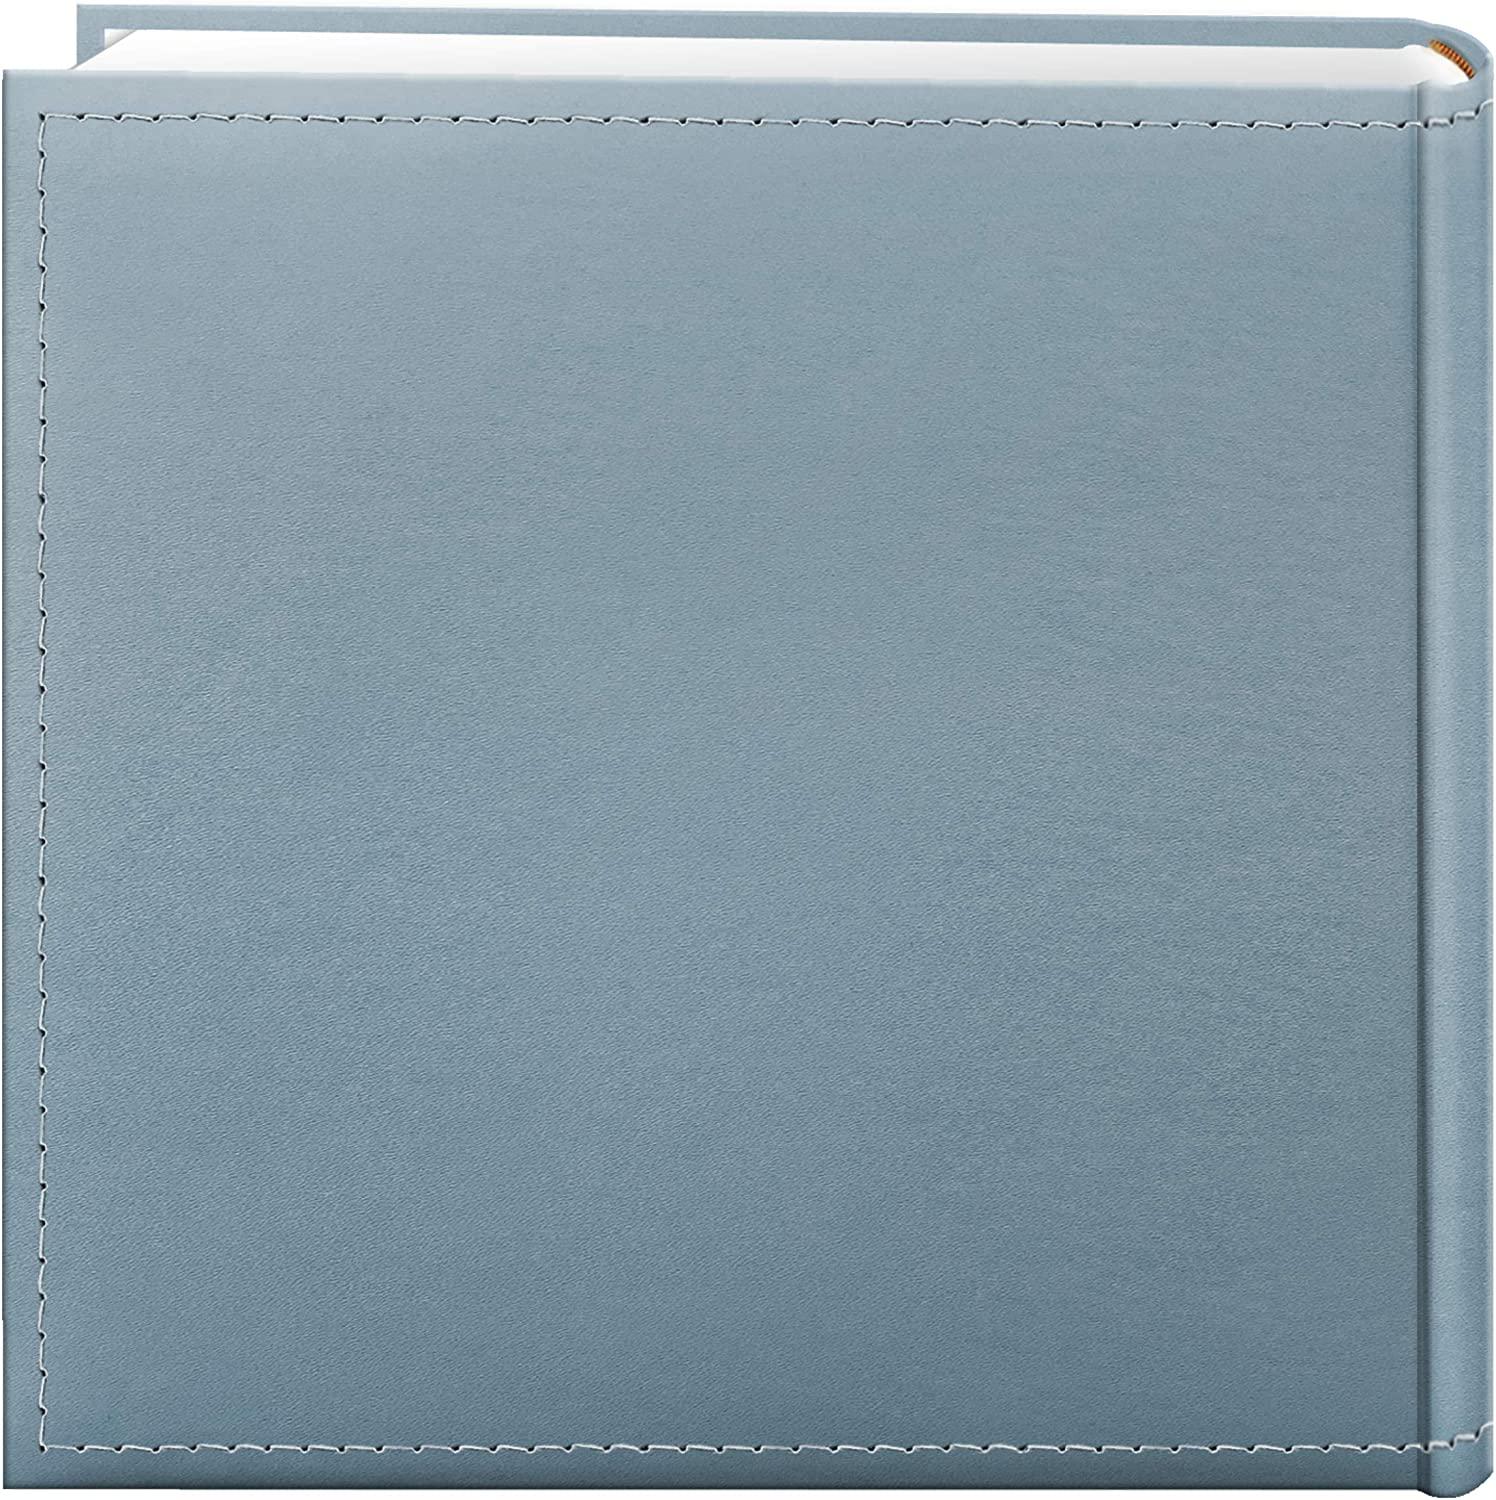 Pioneer Collage Frame Embossed Baby Sewn Leatherette Cover Photo Album, Baby Blue